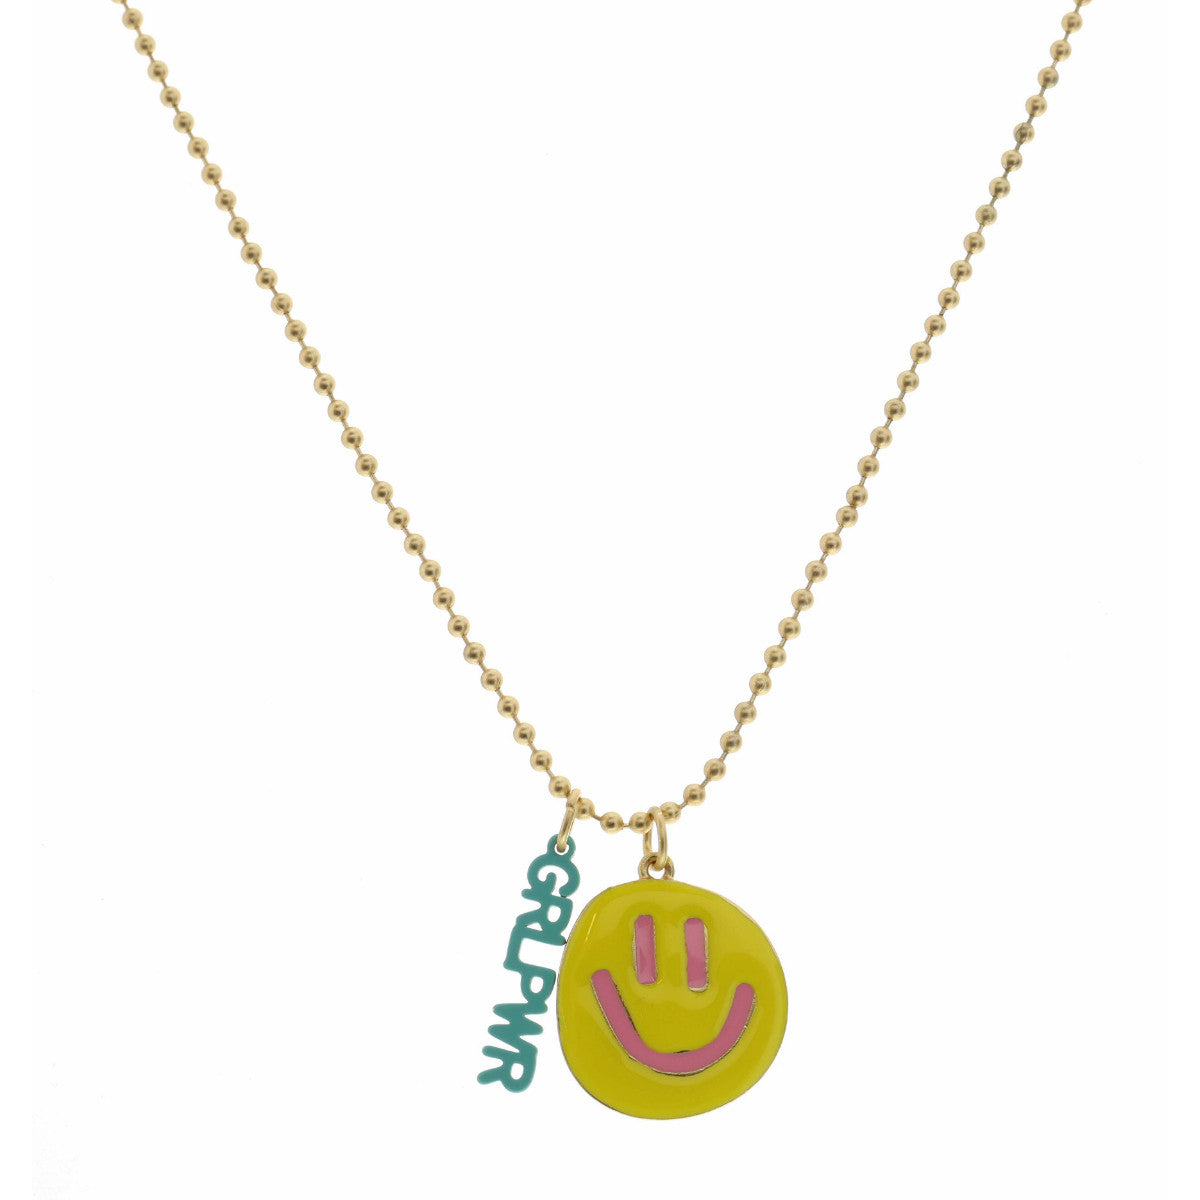 Jane Marie Kids 14" Turquoise "GRLPWR" With Yellow Happy Face Necklace-JANE MARIE-Little Giant Kidz